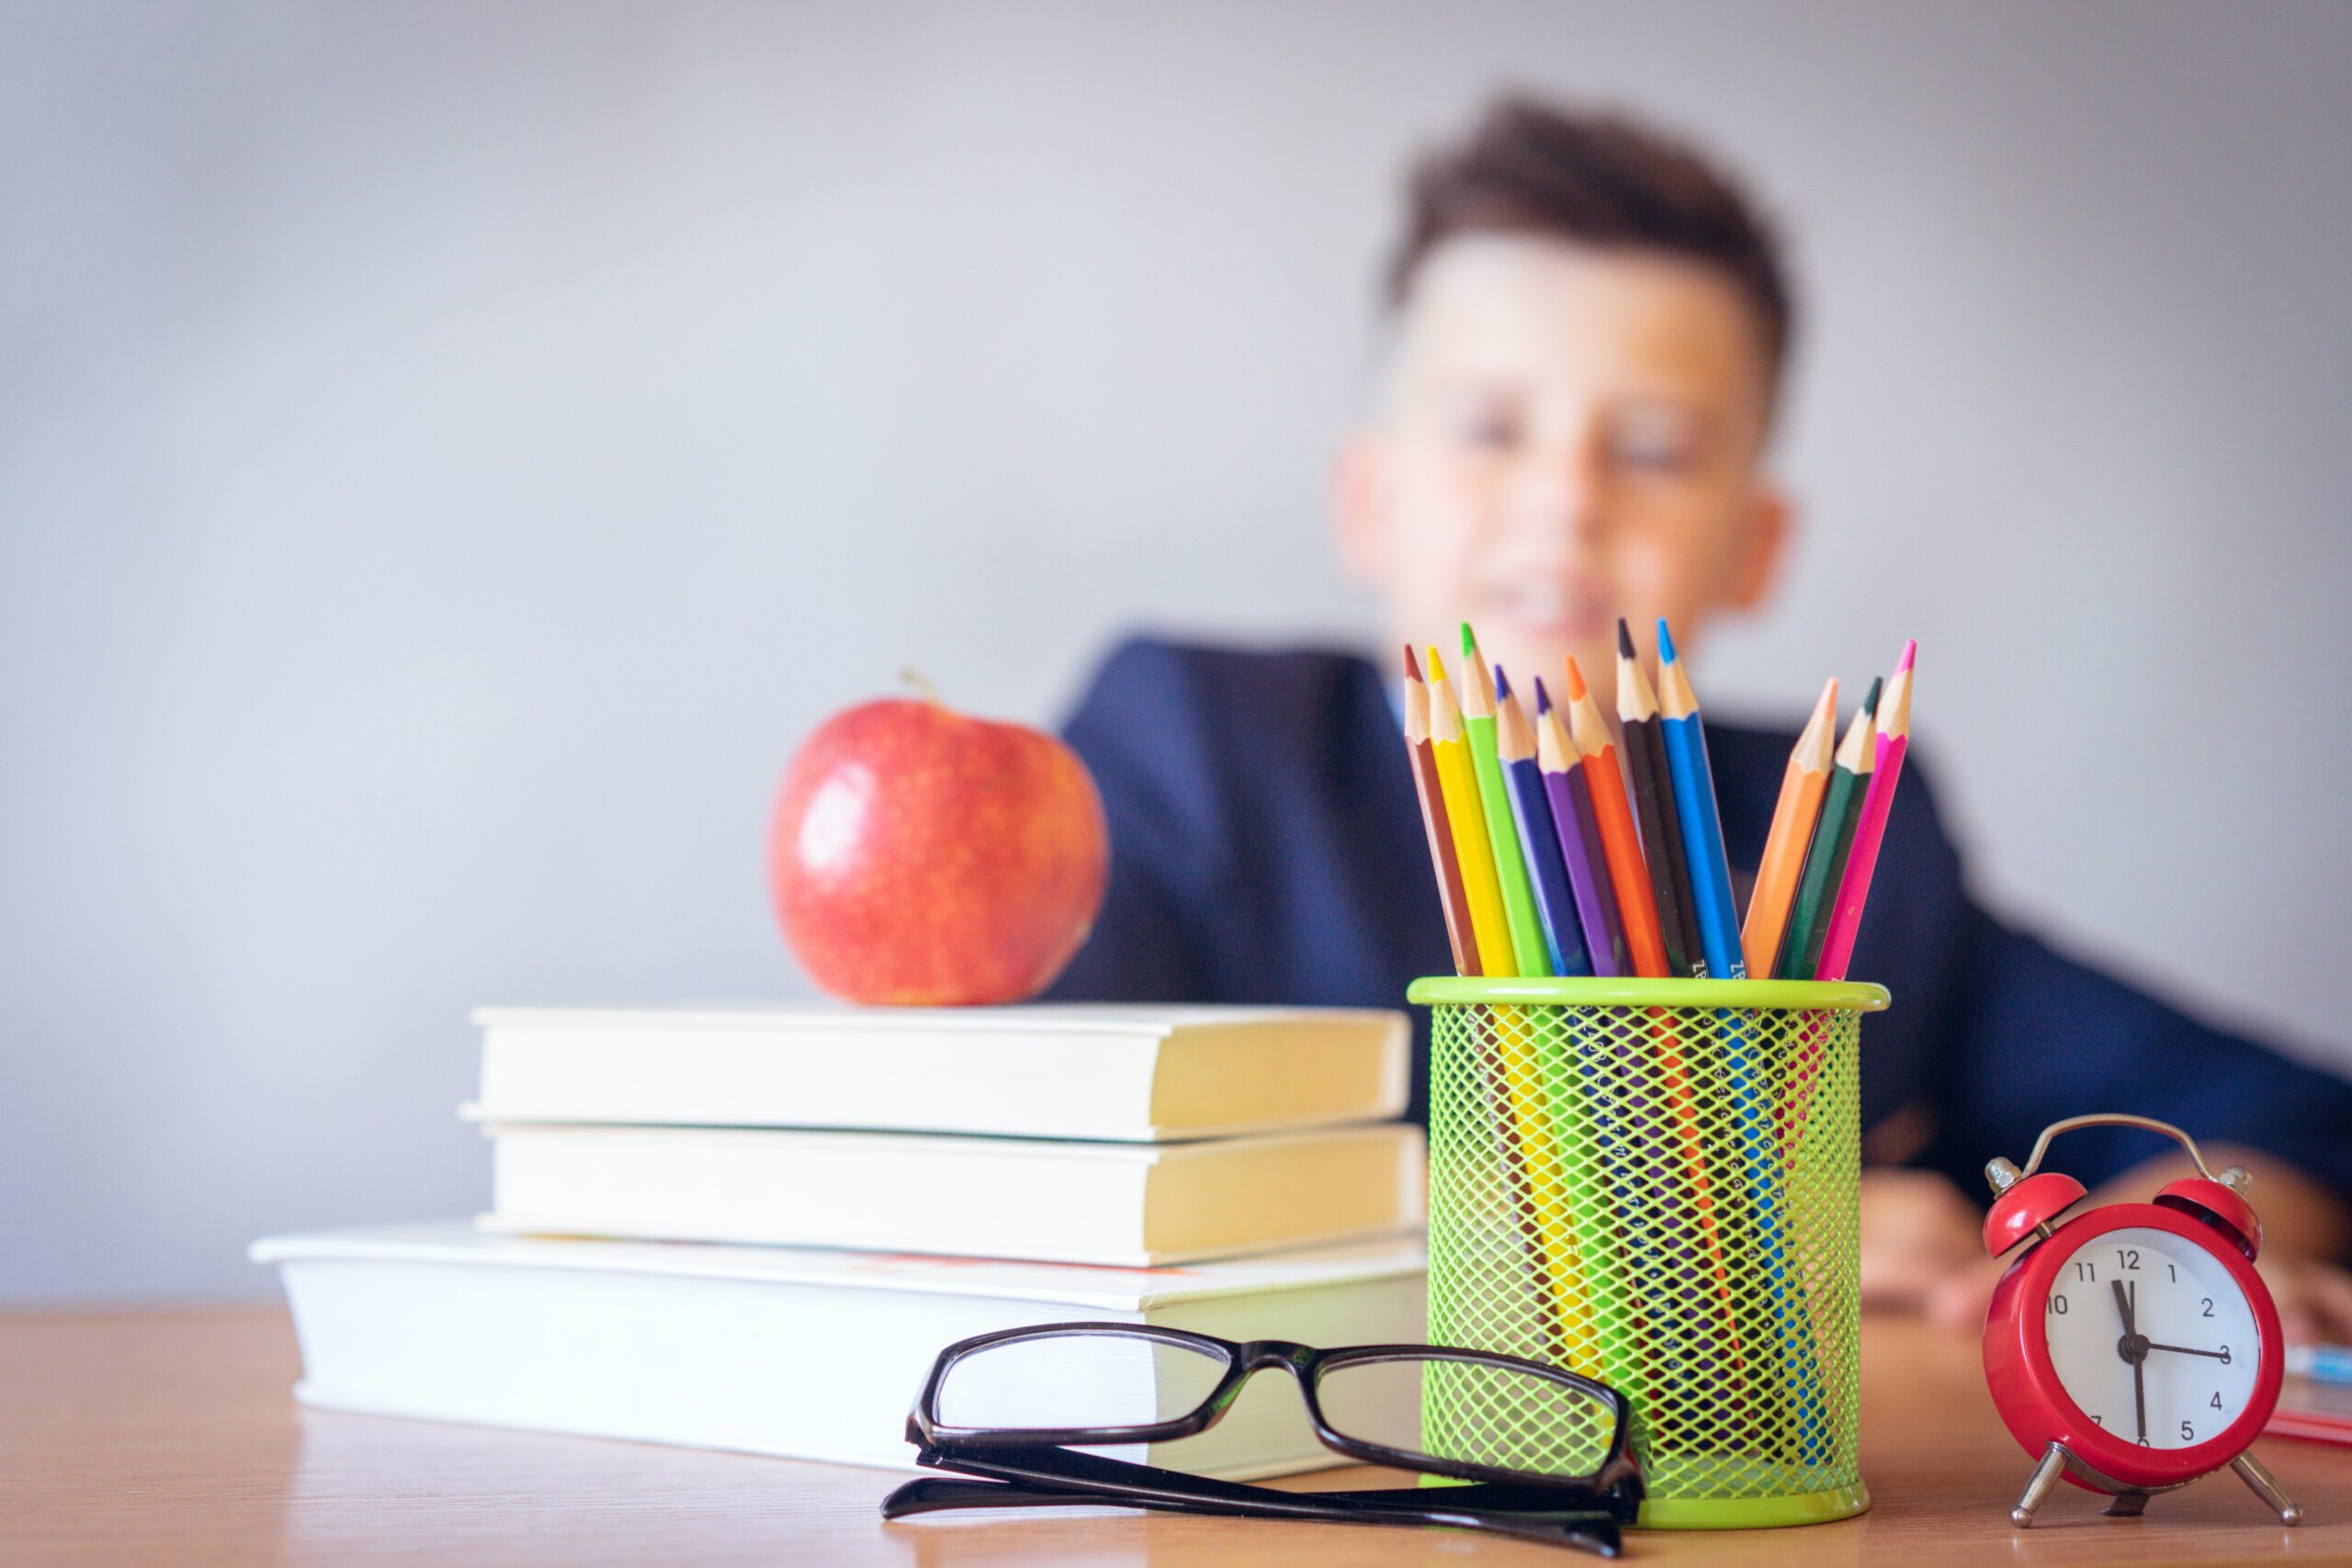 Top tips to pass the Back to School ‘to do’ list